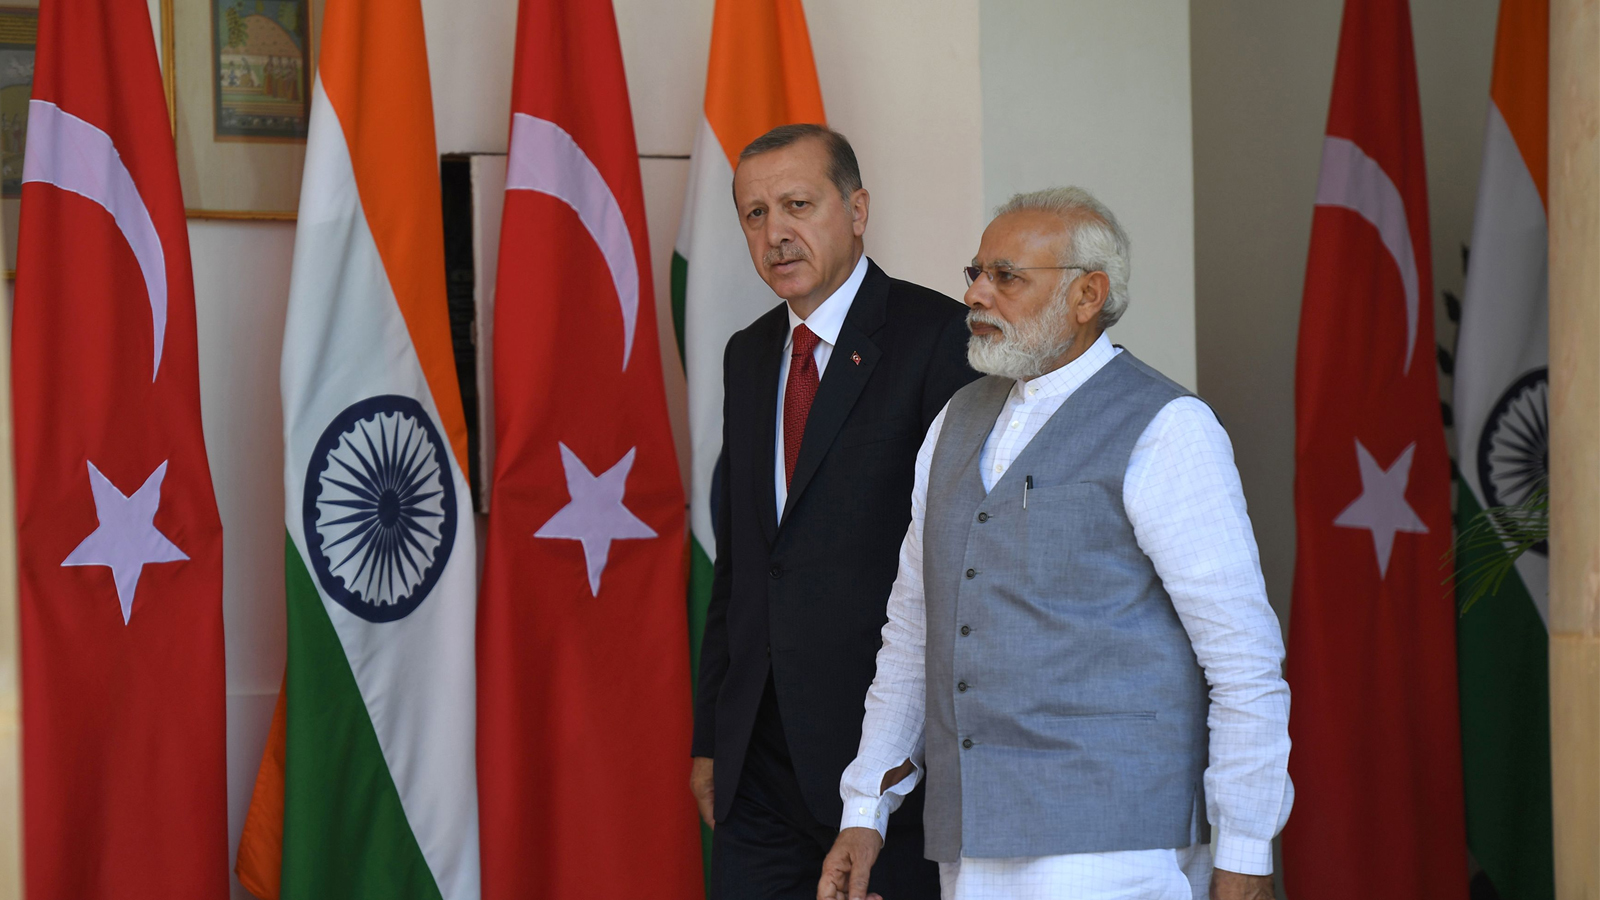 What did India do in Turkey